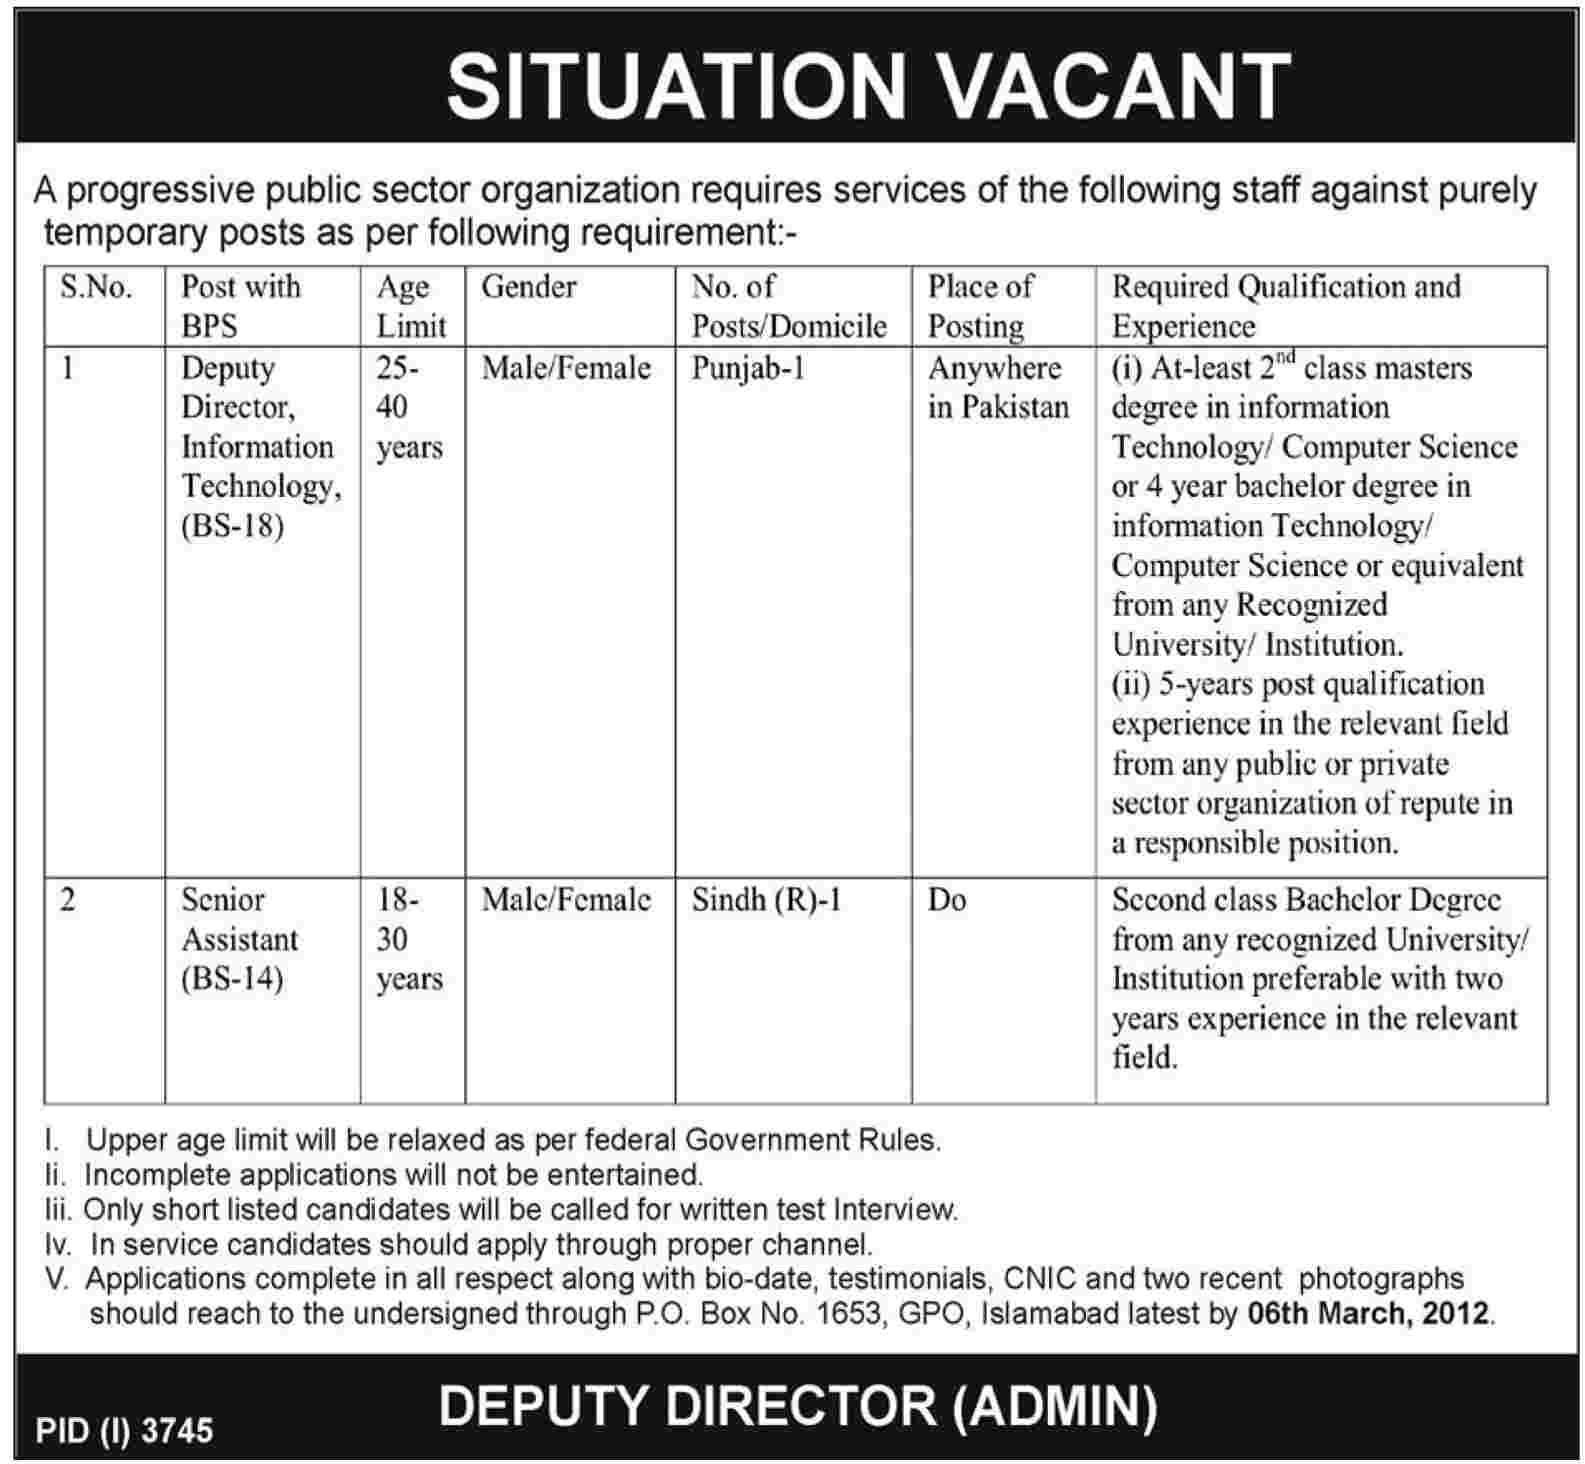 Deputy Director (IT) and Senior Assistant Required by a Public Sector Organization